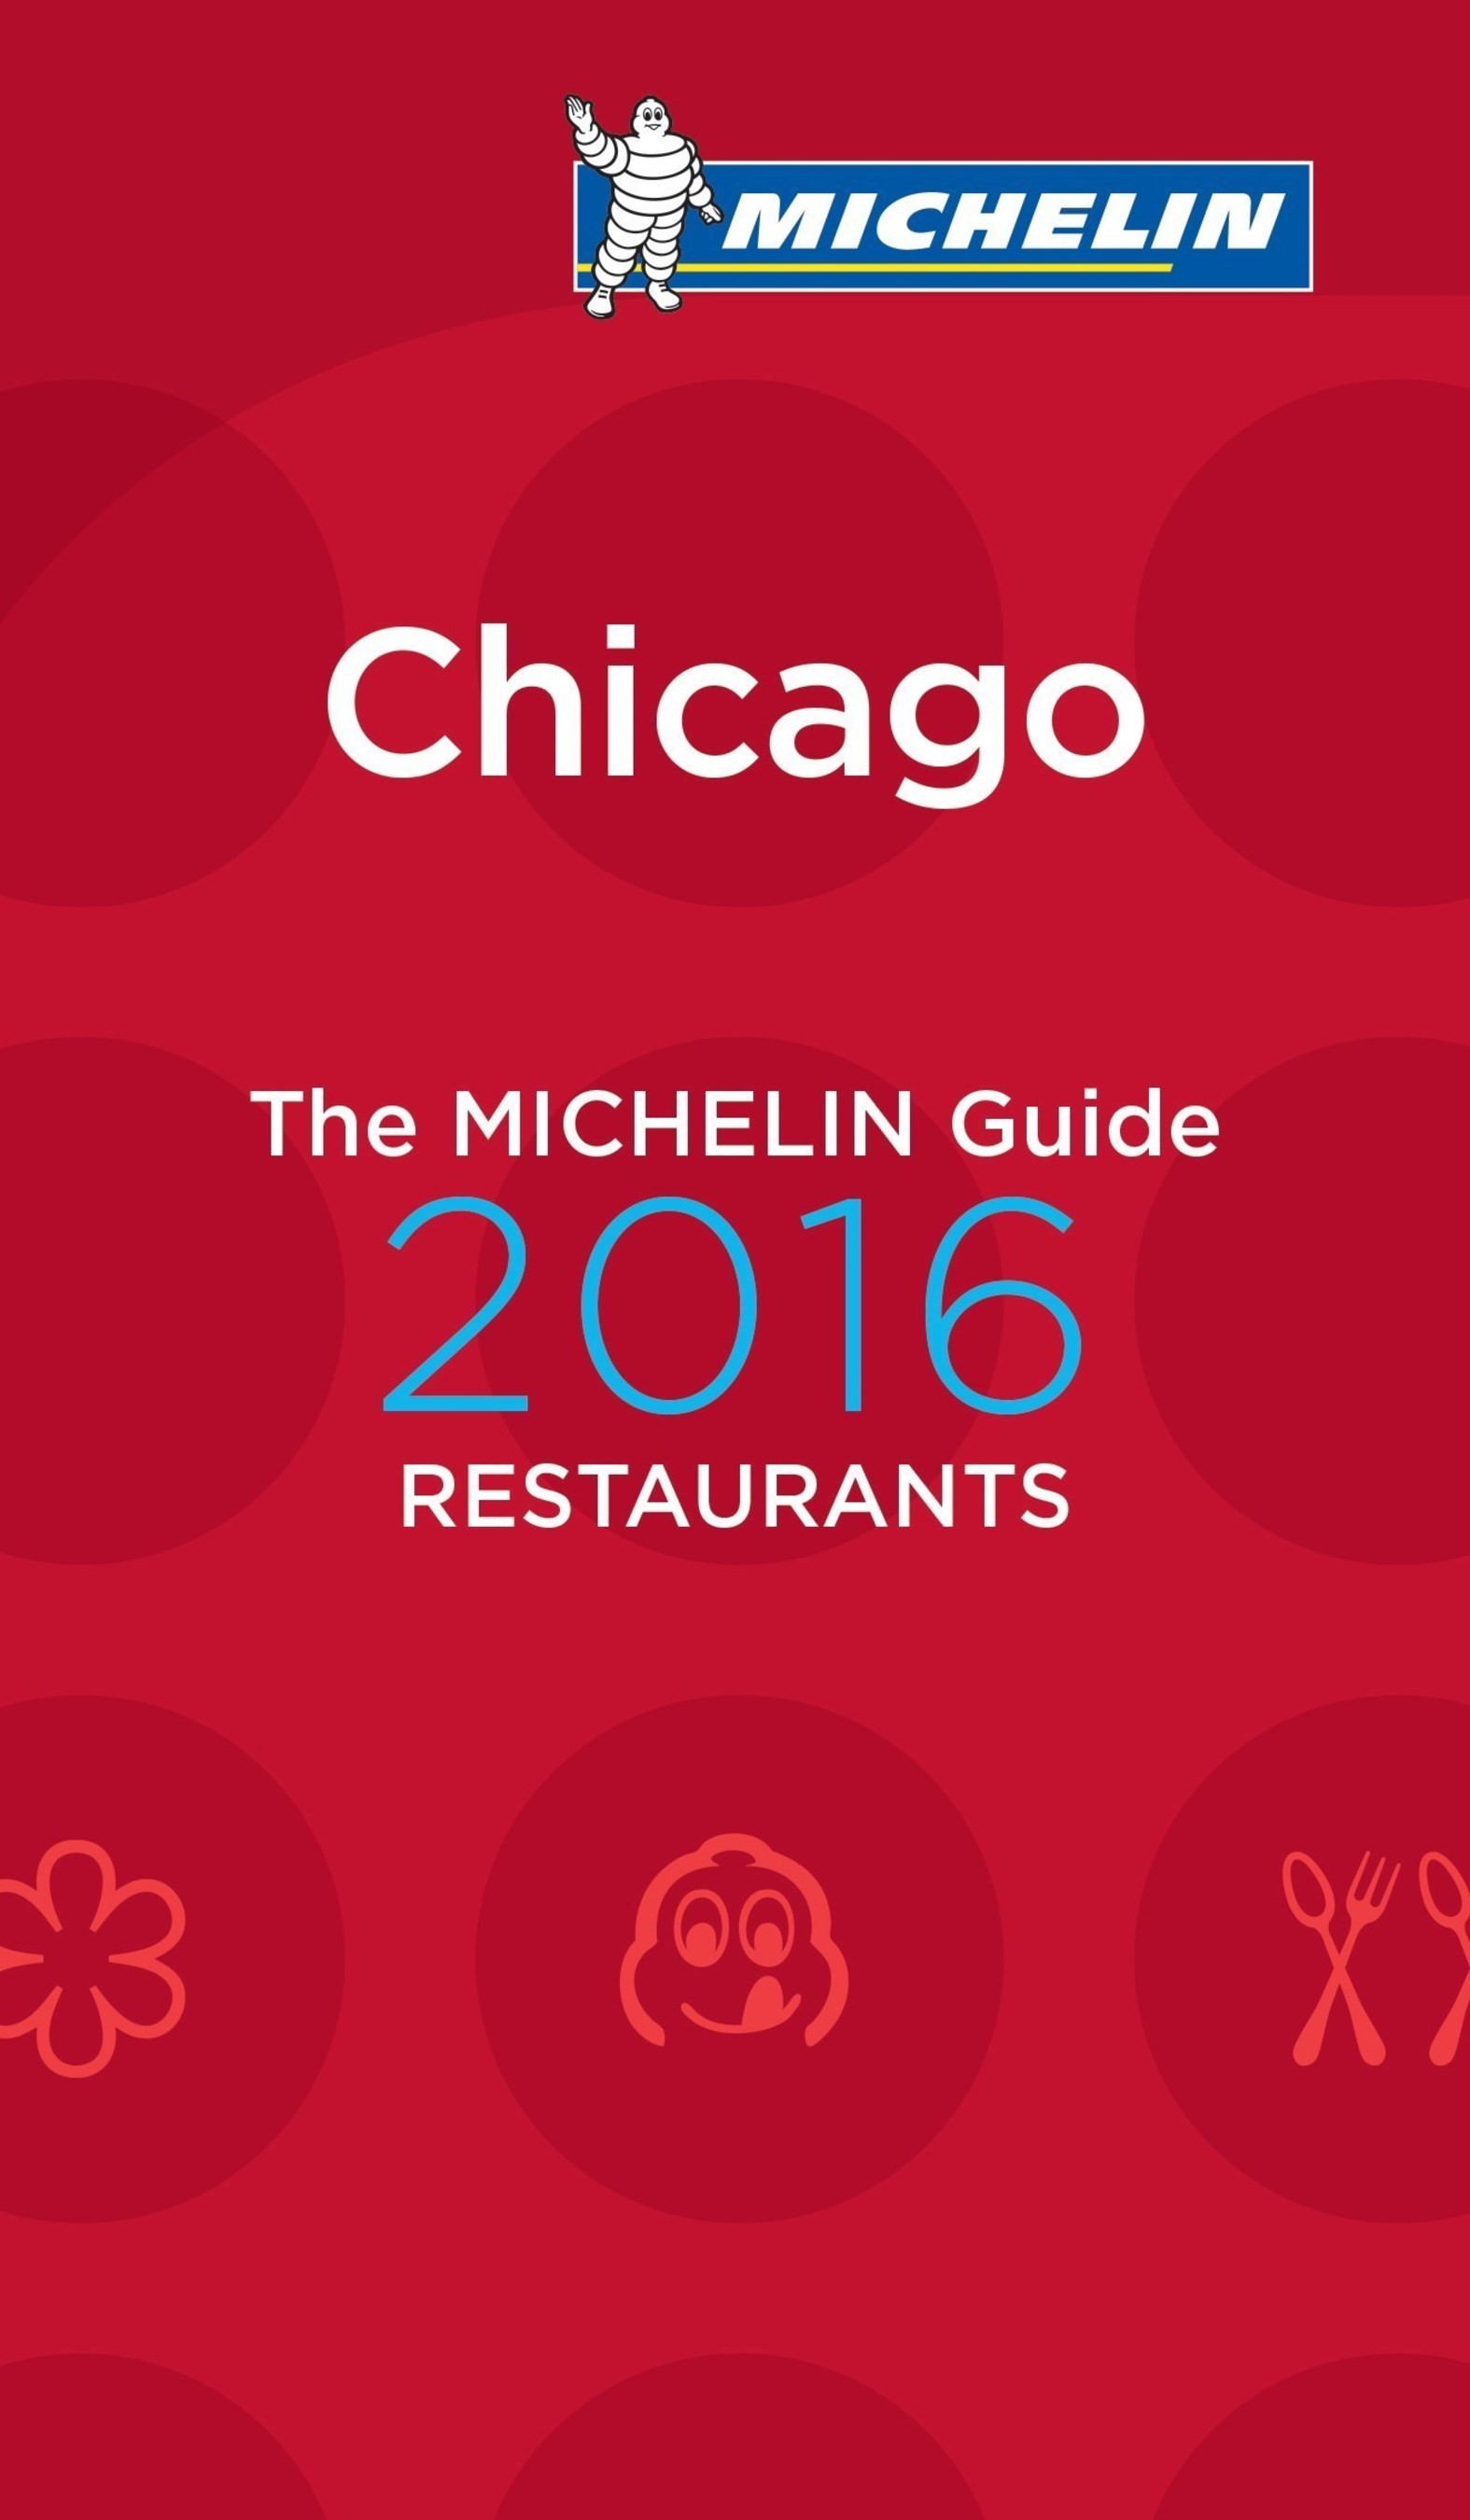 Michelin Highlights Top Restaurants for Good Value in Chicago